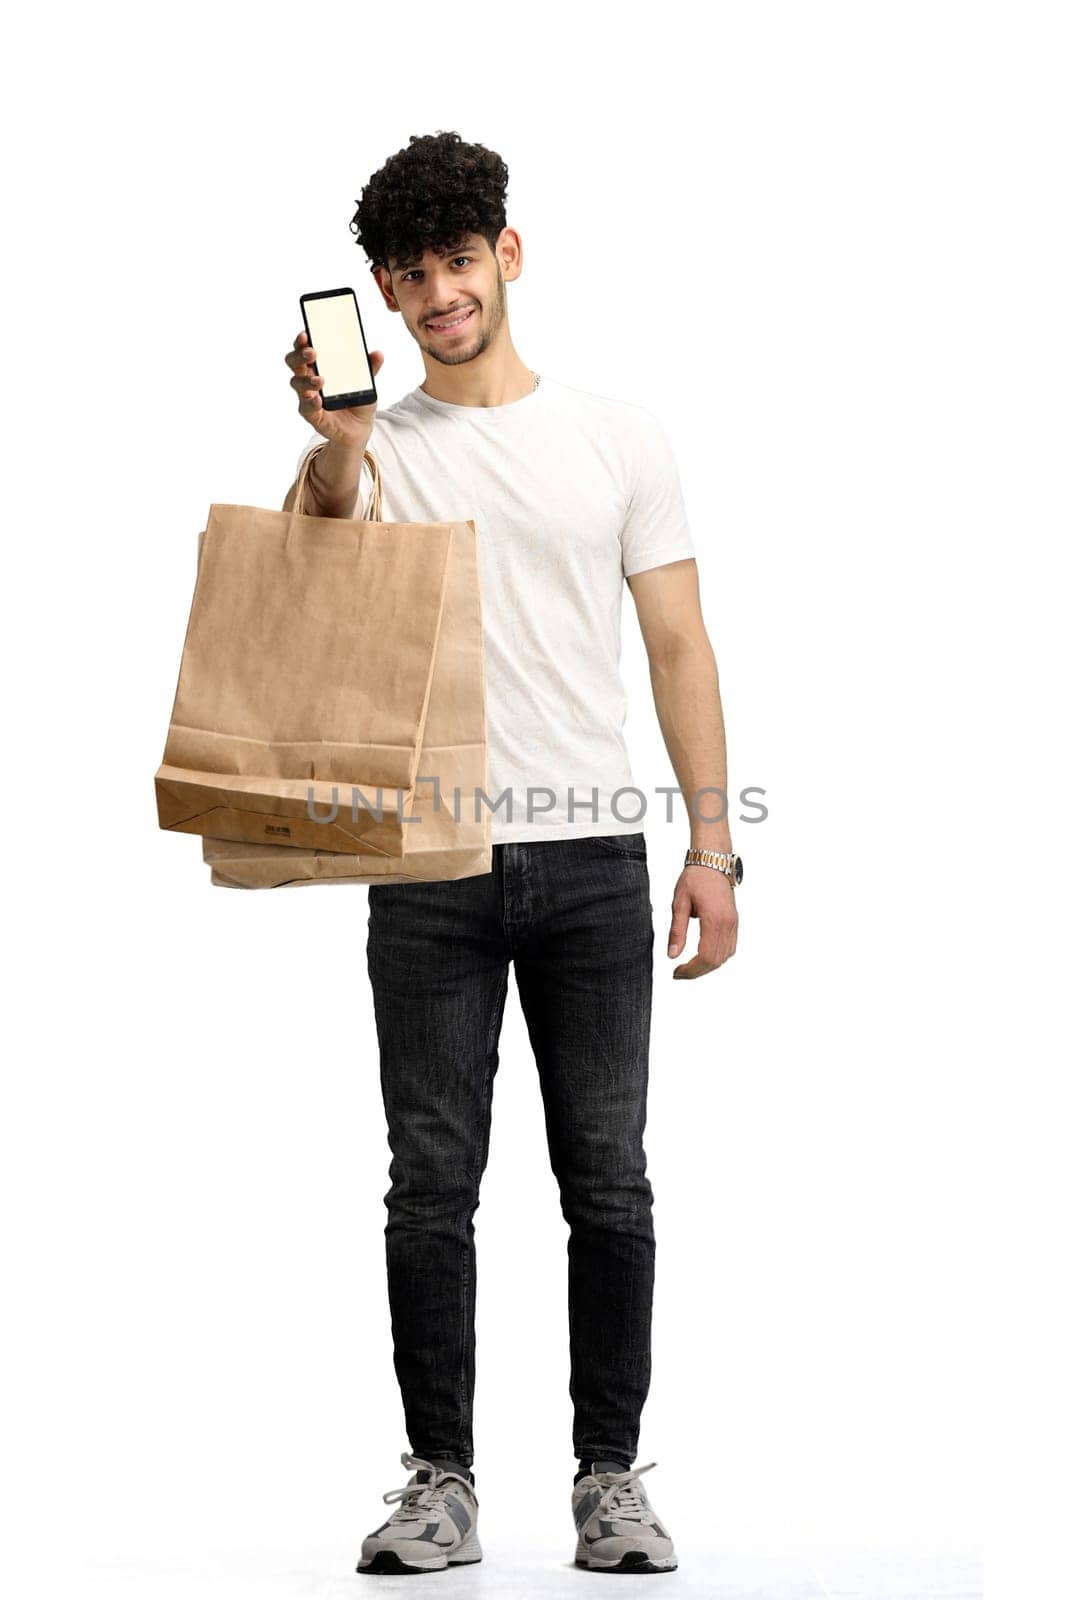 A man, on a white background, in full height, with bags and a phone.